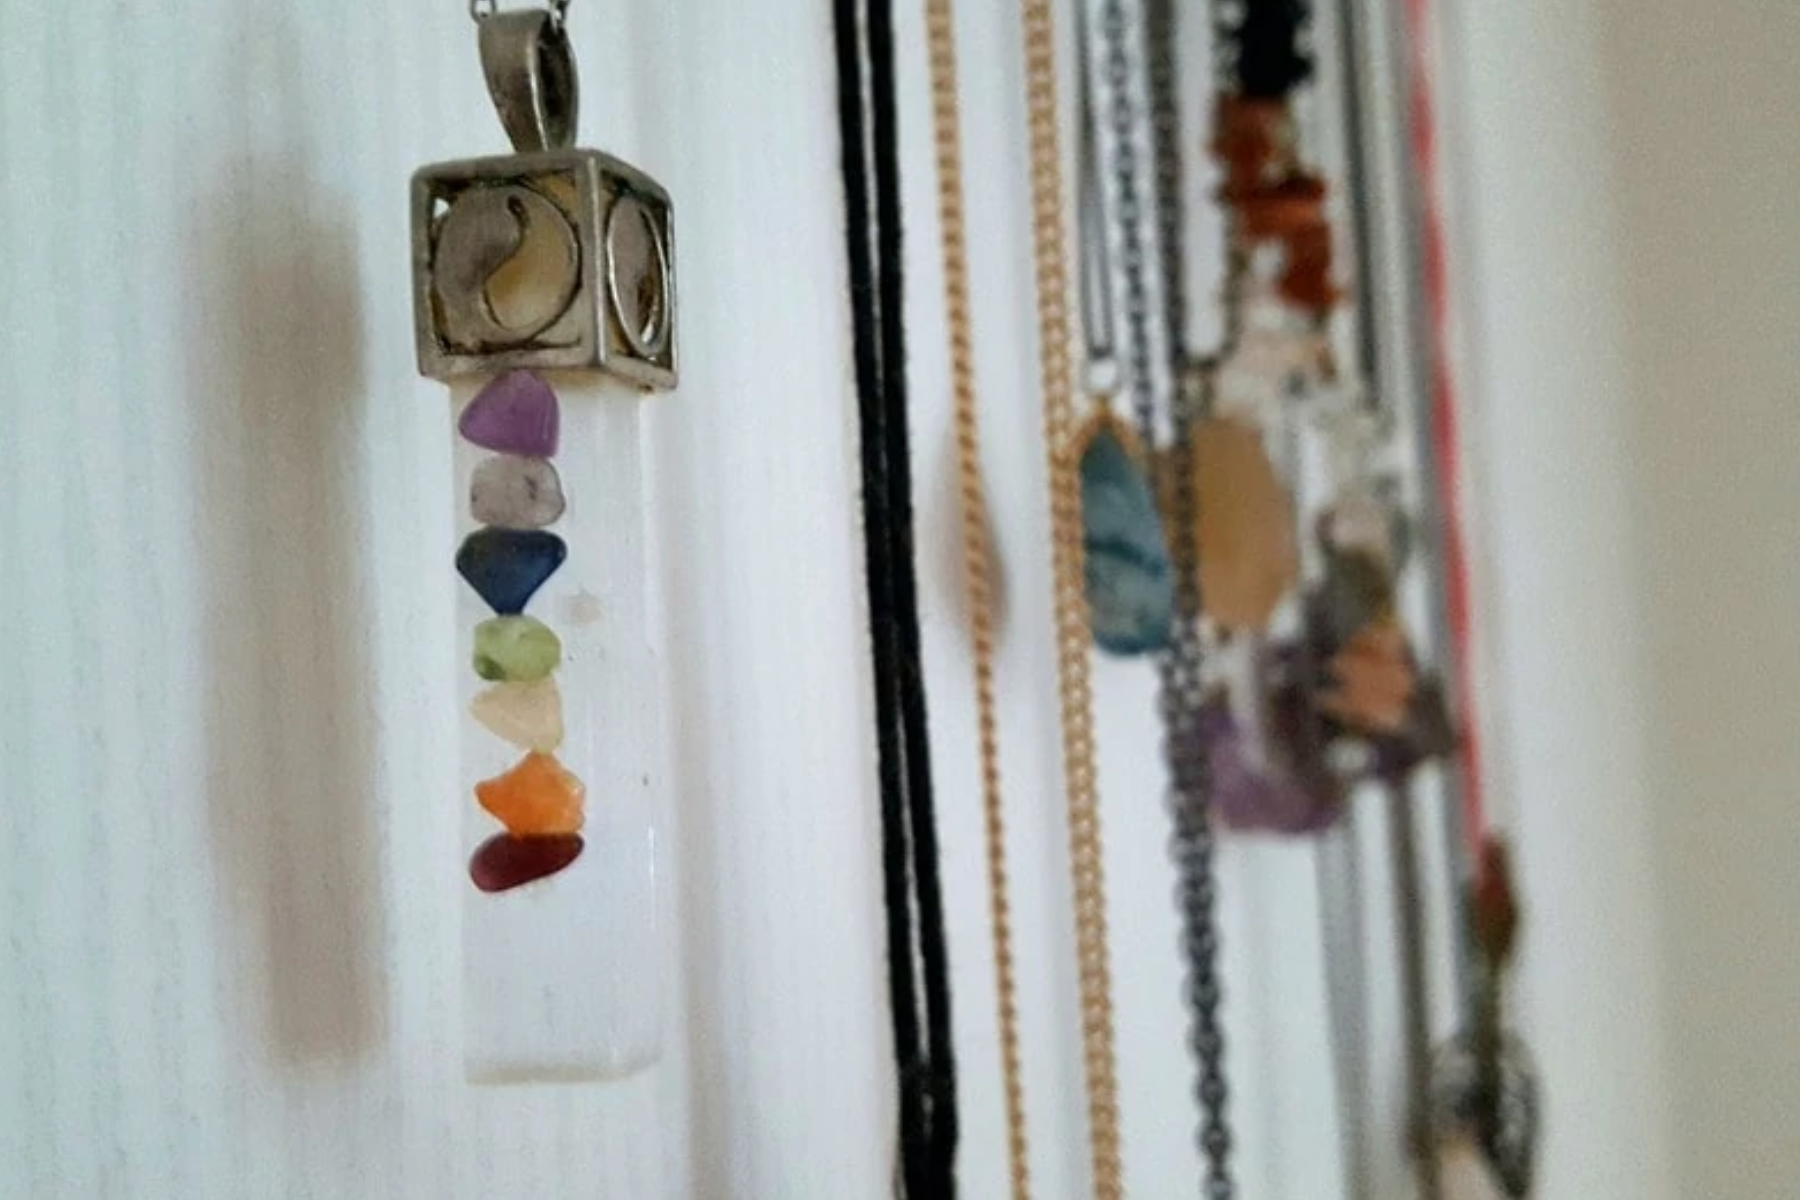 Crystal Healing Chakra Necklaces - Improve Your Well-Being